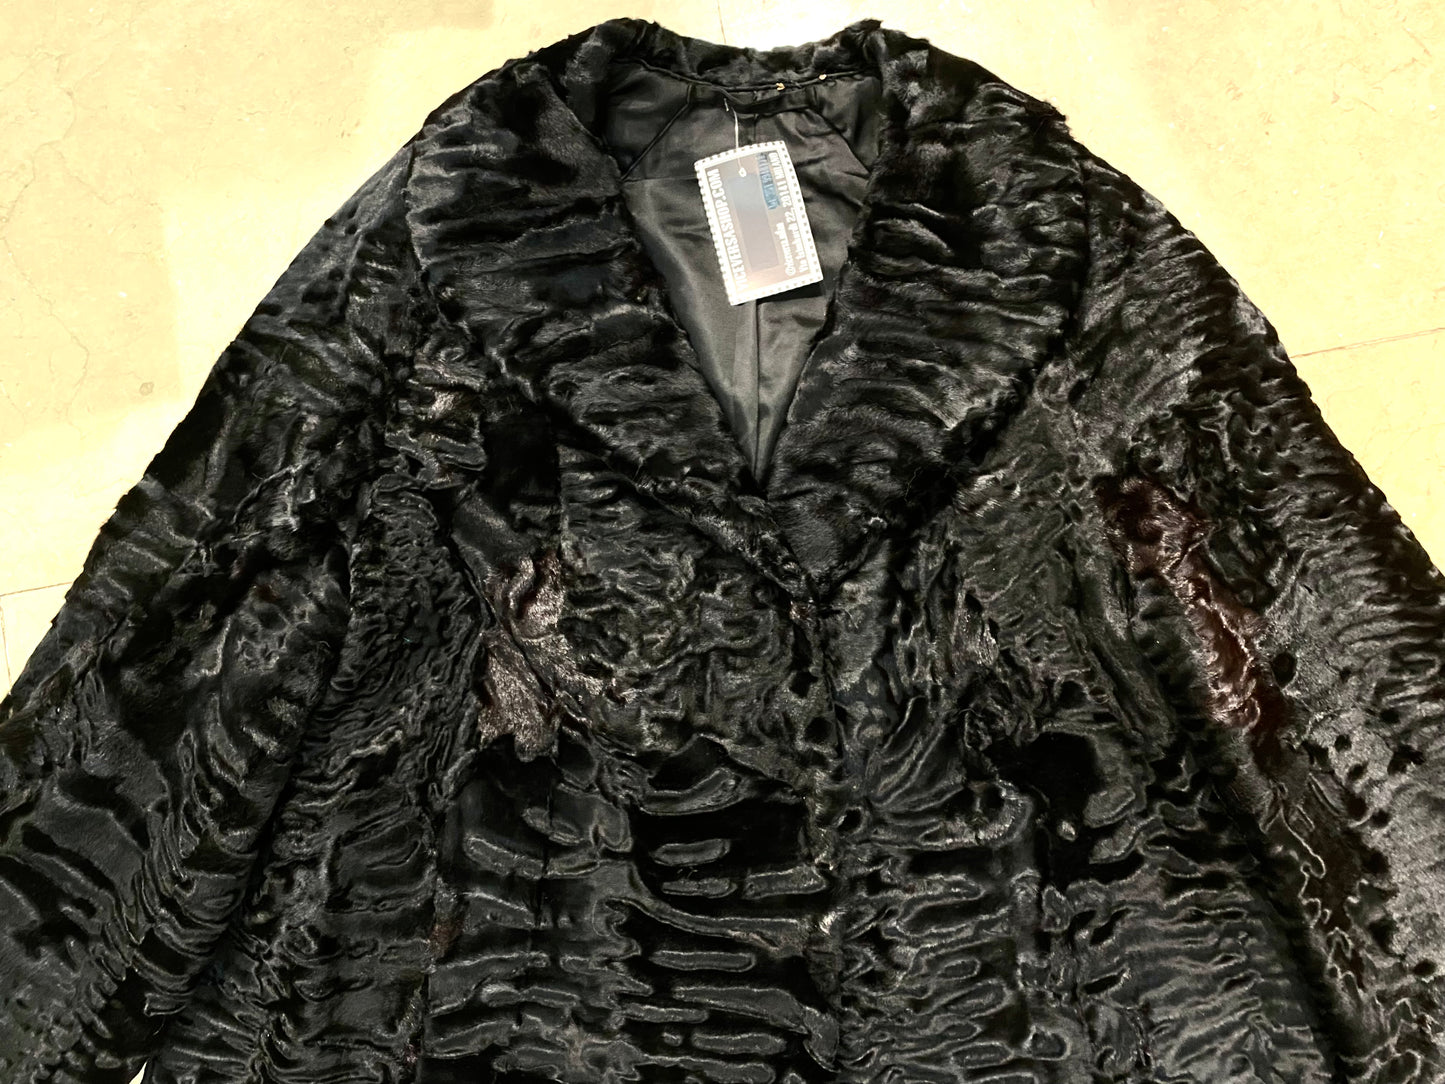 Luxurious Swakara black real fur coat, 80s Italy mint condition